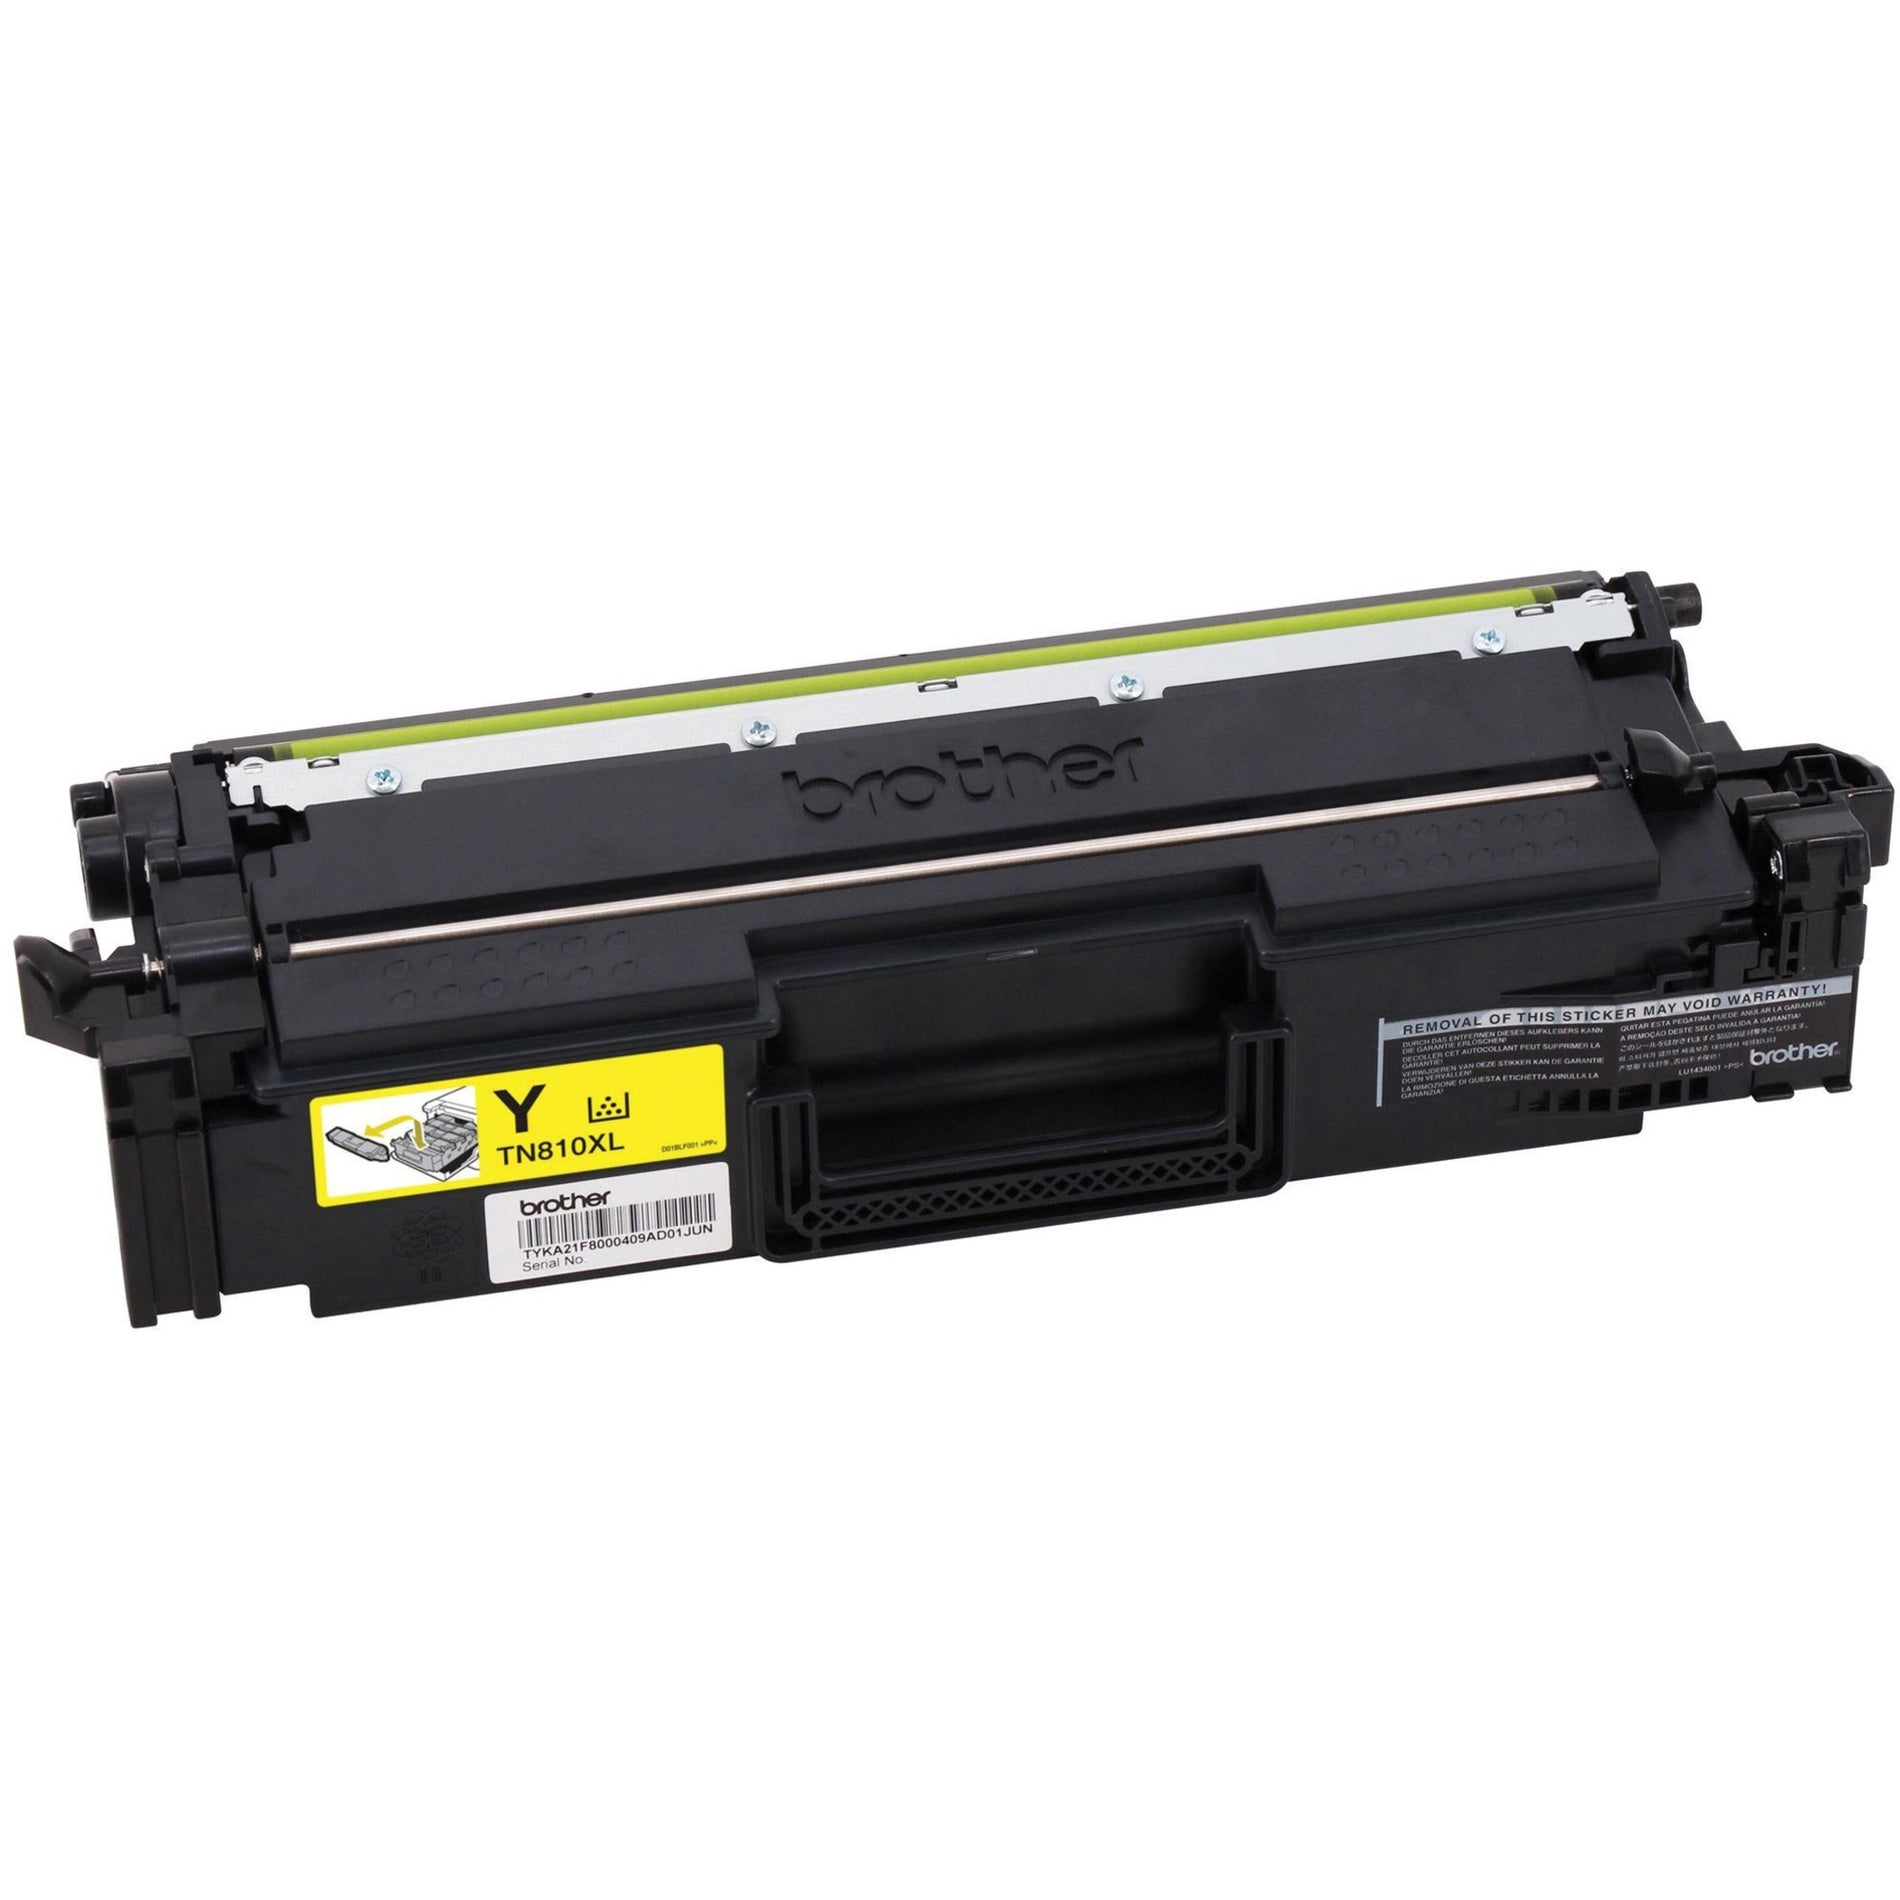 Brother TN810XLY High-Yield Yellow Toner Cartridge, 9000 Pages